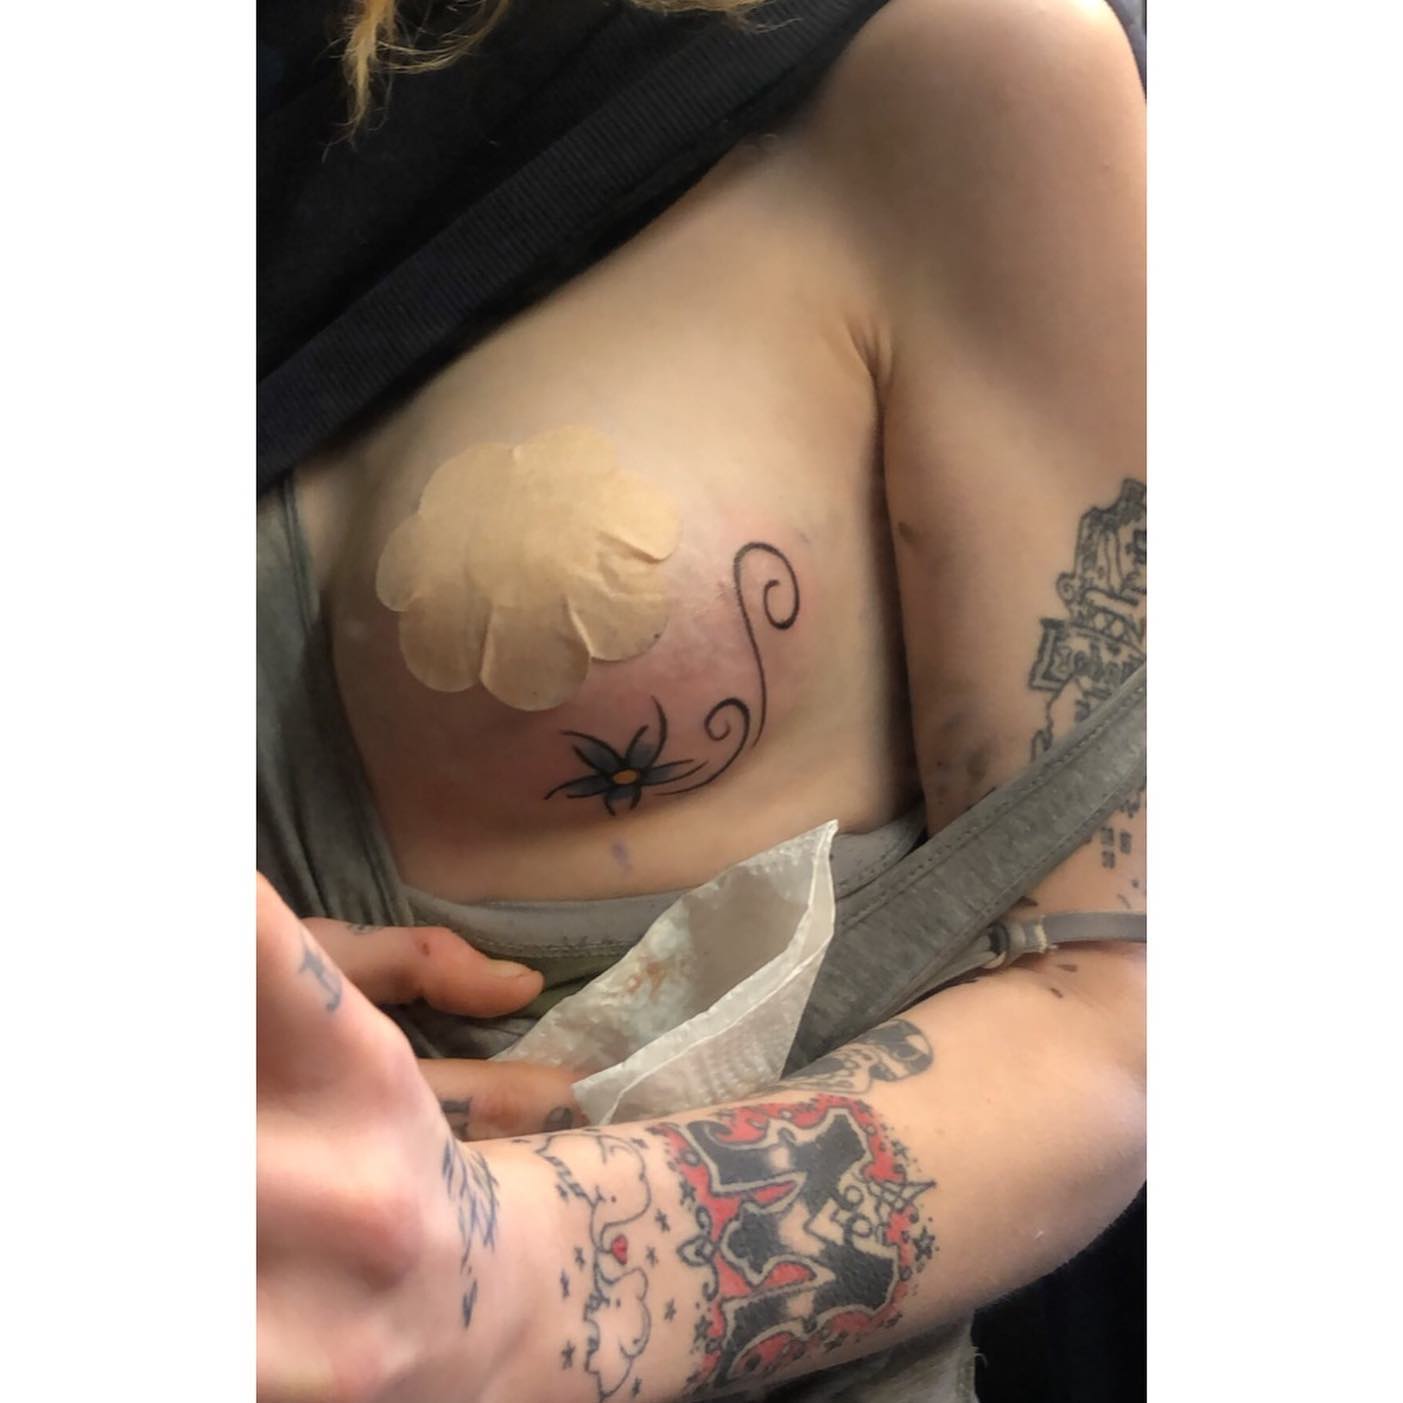 🖕🏻 FUCK CANCER 🖕🏻 Not something I’d usually post but I got this tattoo for my grandma who was recently diagnosed with breast cancer, she loves flowers and her favourite colour is blue. The flower is where her lumps are roughly and it will remind me forever of what a fighter she is 💖 #fuckcancer #cancersucks